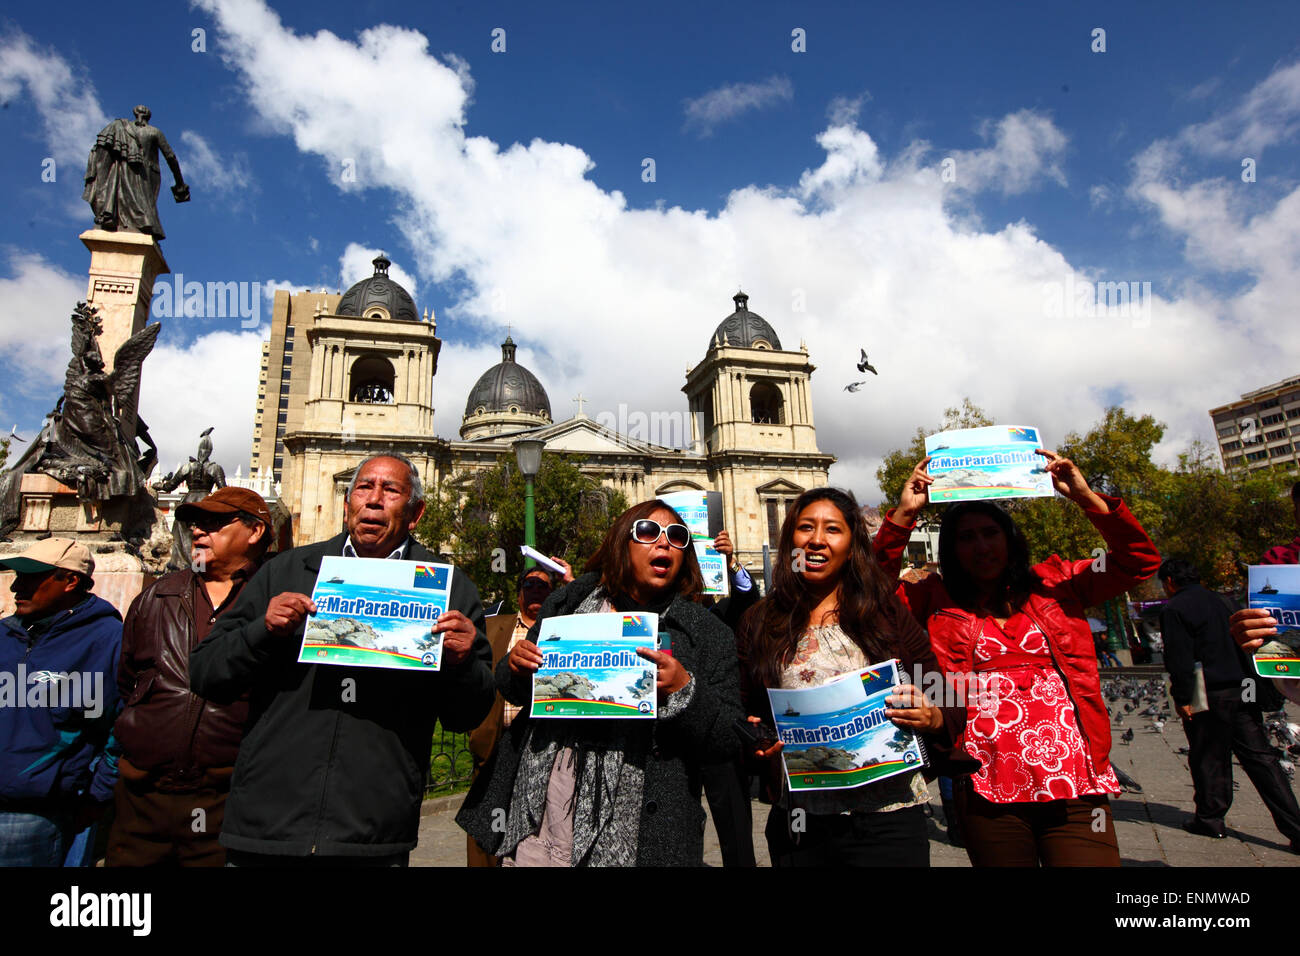 La Paz, Bolivia, 8th May 2015. Bolivians chant 'Mar para Bolivia' / 'Sea for Bolivia' and hold banners with the hashtag #MarParaBolivia at the end of Bolivia's final presentation to the International Court of Justice in The Hague, which had been shown live on a giant screen in Plaza Murillo. The initial hearings for Bolivia's case reclaiming access to the Pacific Ocean against Chile have been taking place in the ICJ this week, the hearings were to debate the Chilean objection that the court doesn't have the jurisdiction to judge the case. Credit:  James Brunker / Alamy Live News Stock Photo